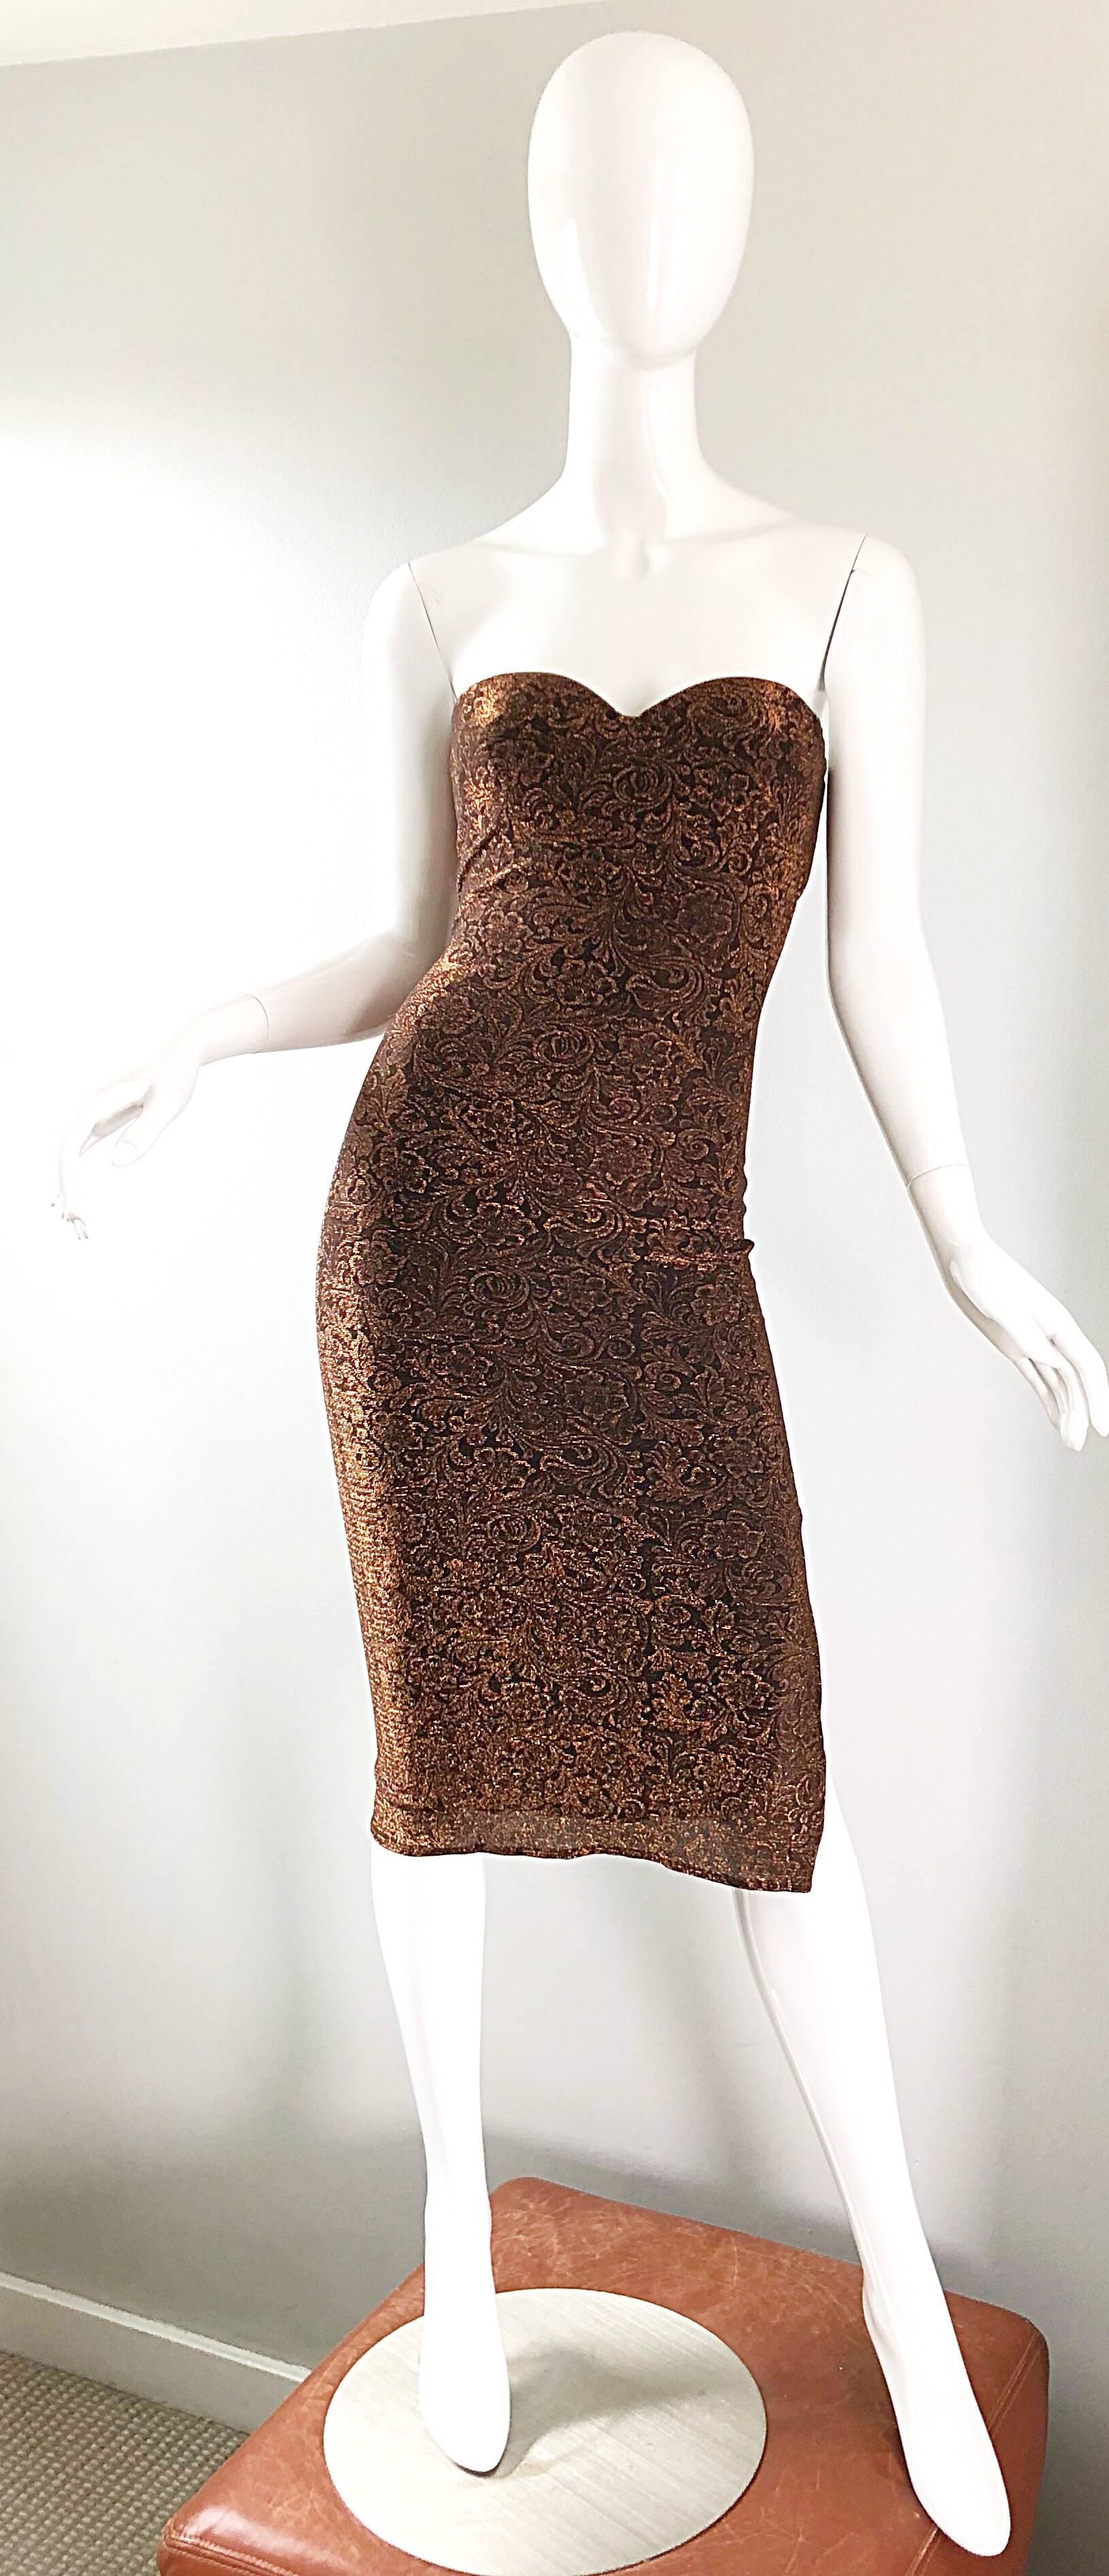 Sexy 90s does 50s vintage ELETRA CASADEI metallic bronze / copper bodycon convertible strap wiggle dress! Dress can be worn with attached adjustable black straps, or as a strapless dress with straps simply tucked in. Stretch bronze jersey fabric